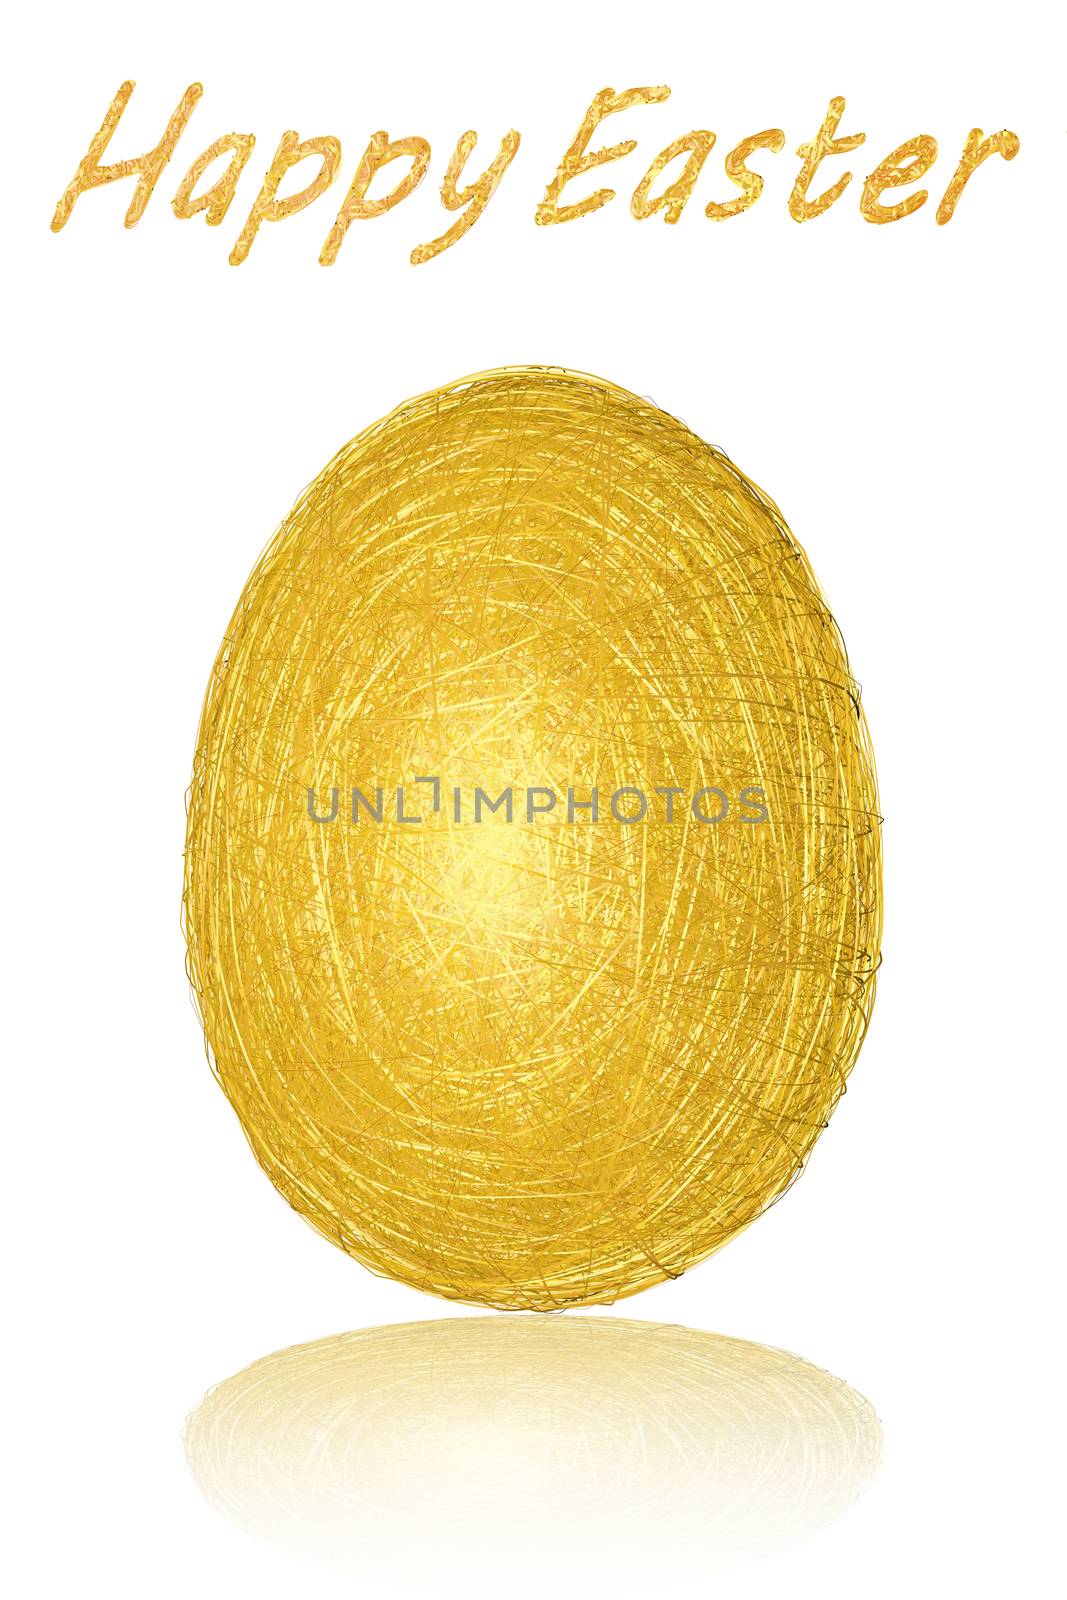 Easter egg of gold stripes on white background by oneo